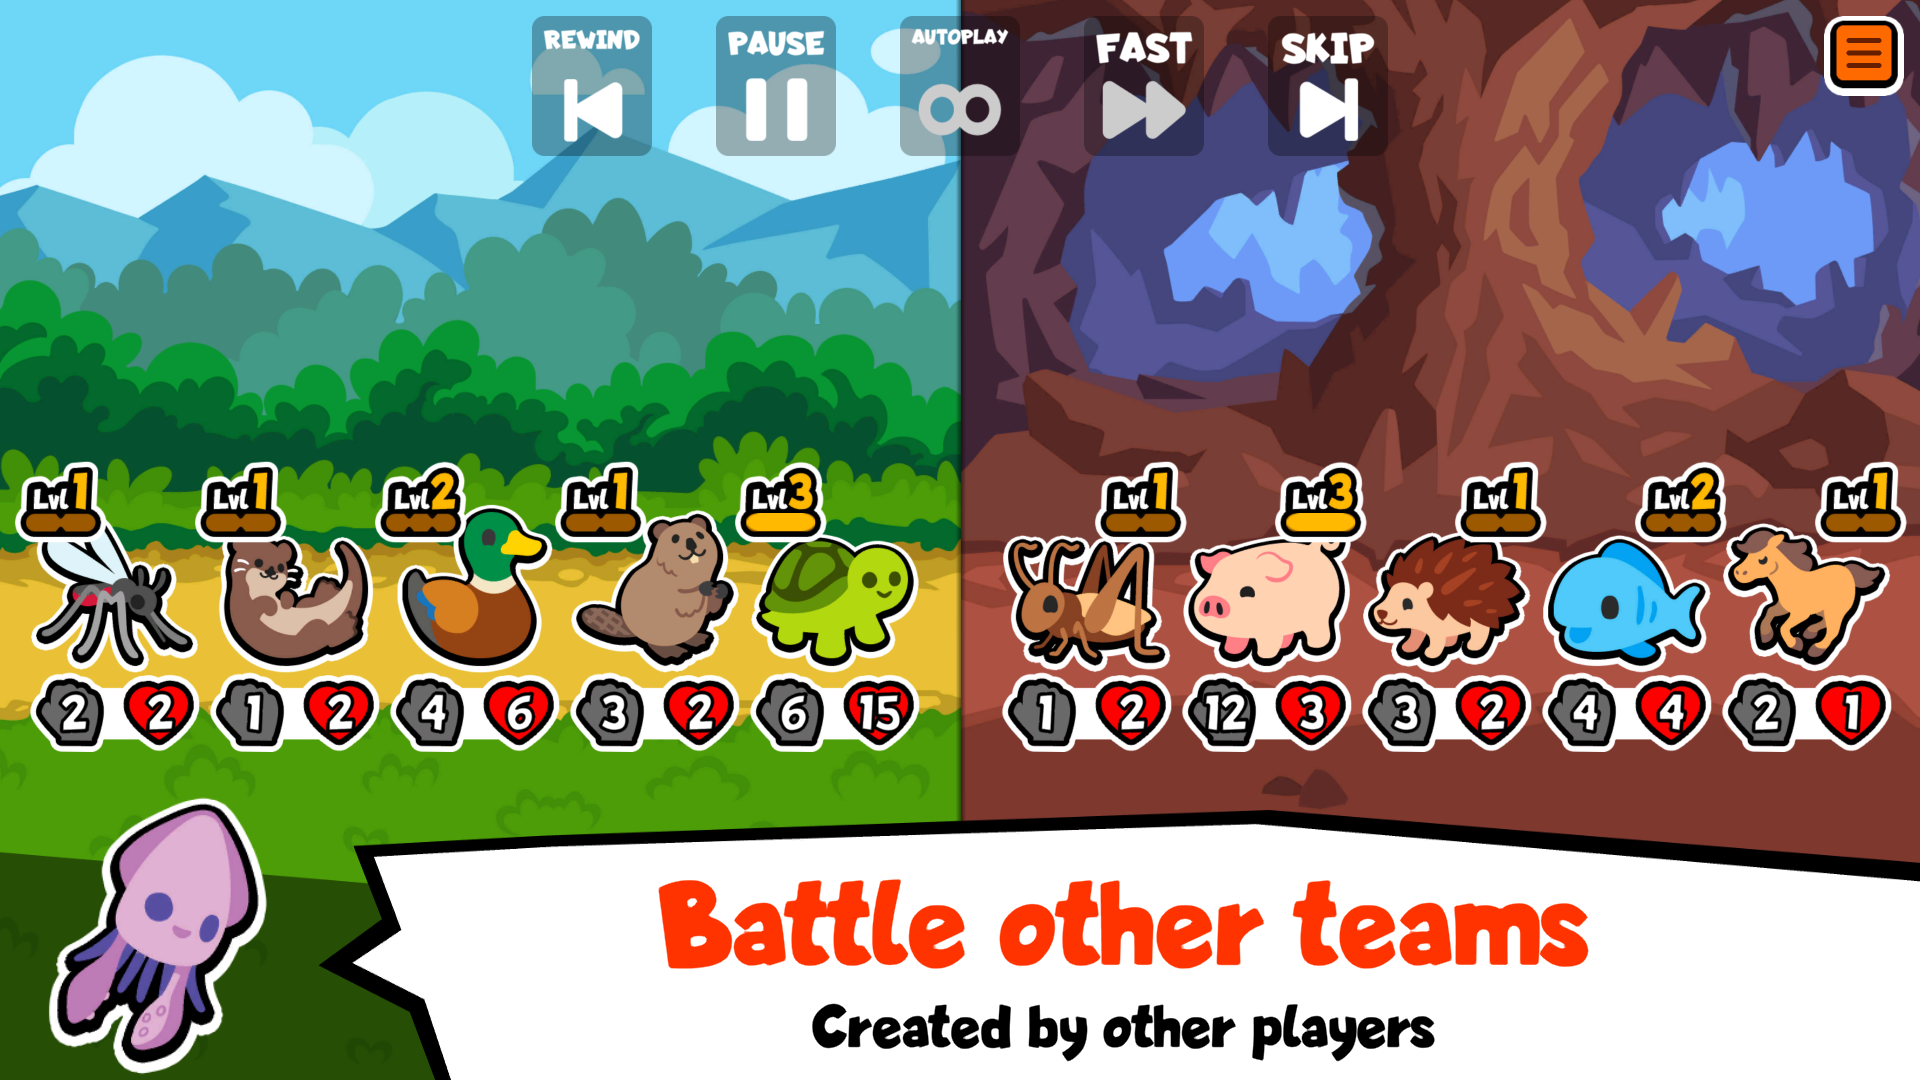 Battle other teams - Created by other players